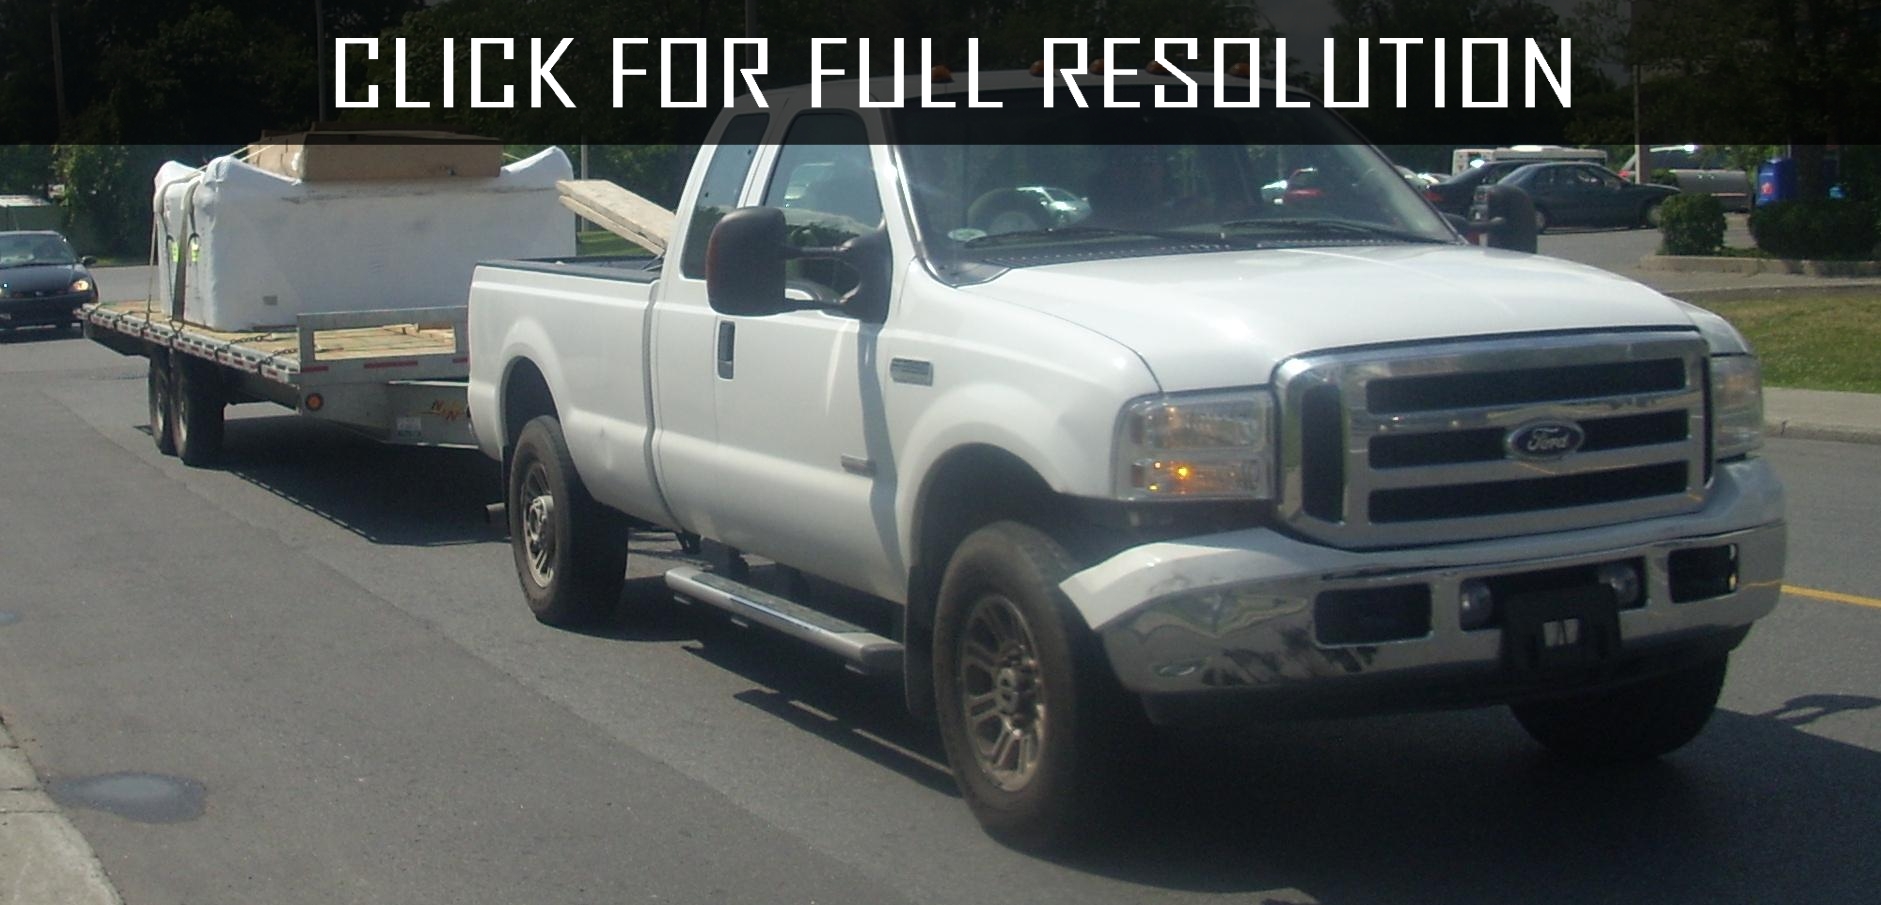 Ford Super Duty Extended Cab